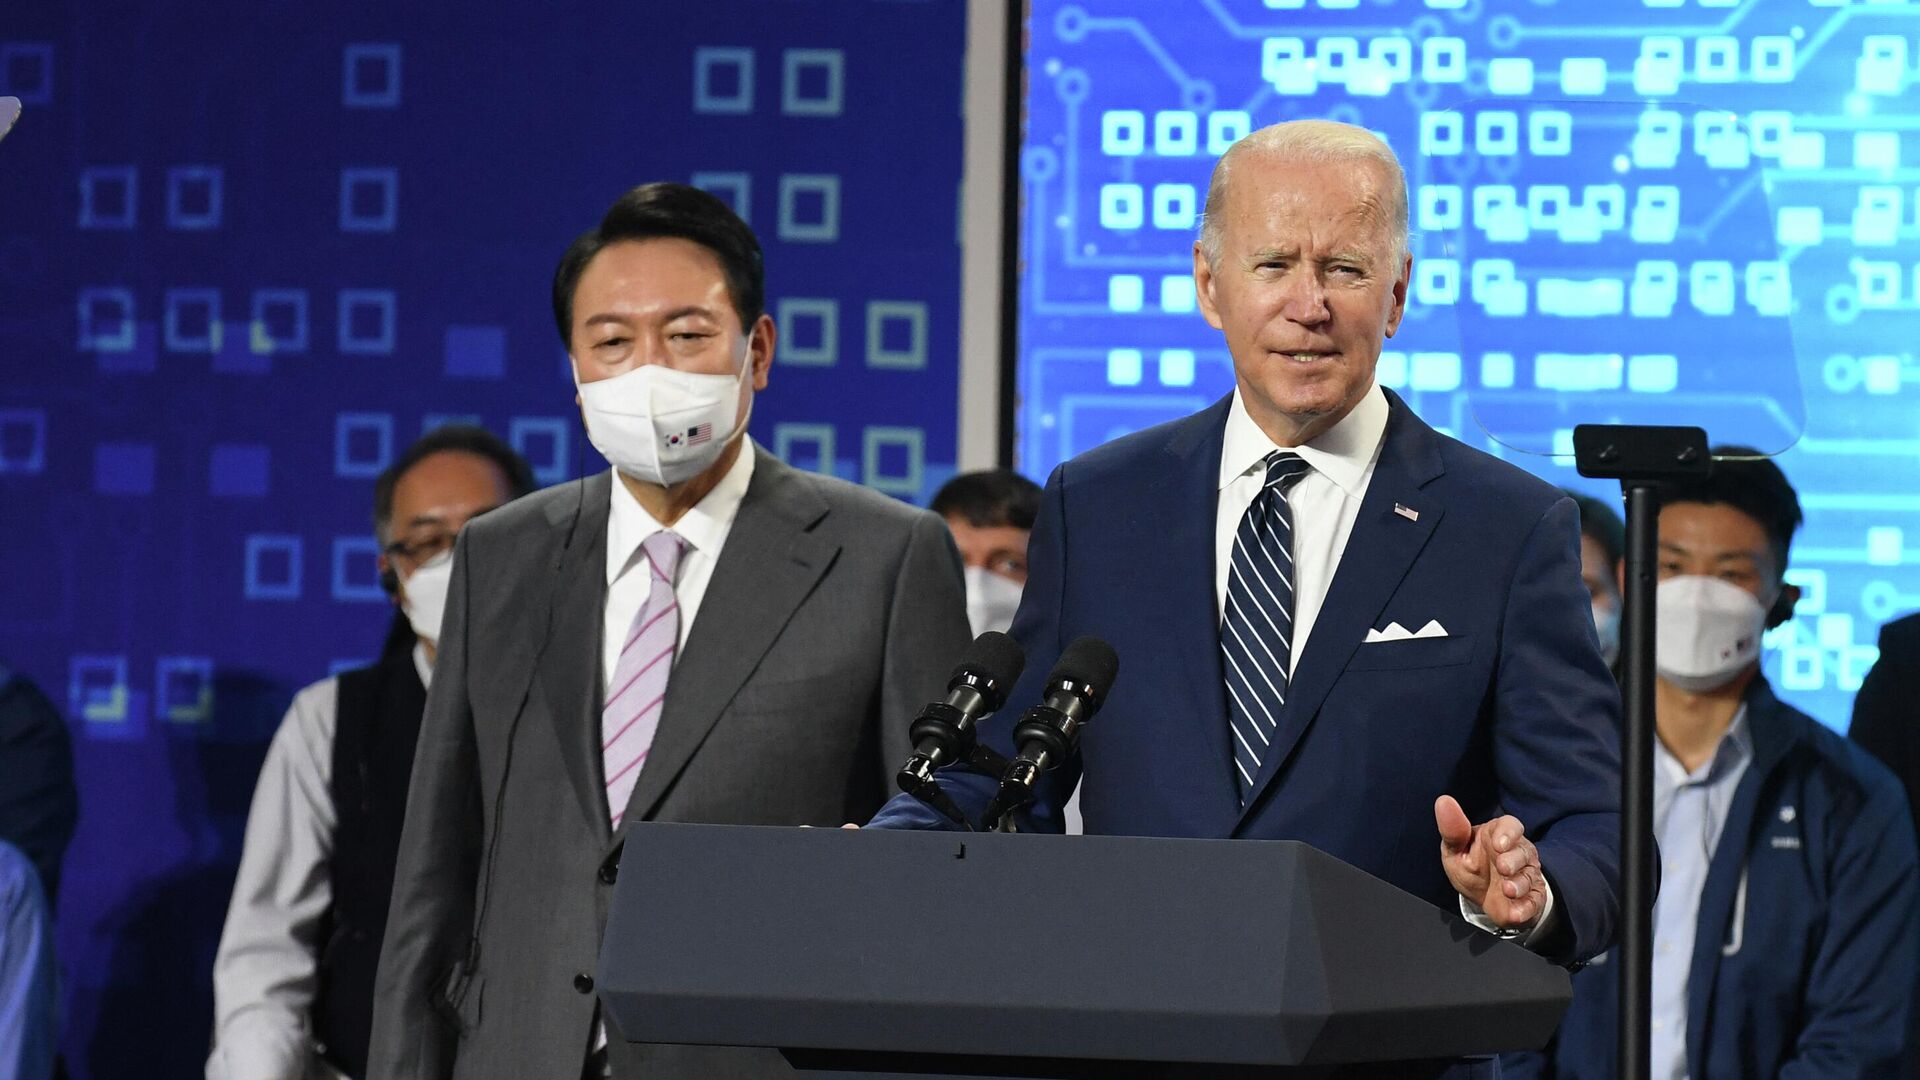 US President Joe Biden (R) speaks with South Kroean President Yoon Suk-youl (L) during a press conference after visiting at the Samsung Electronic Pyeongtaek Campus in Pyeongtaek on May 20, 2022 - Sputnik International, 1920, 21.05.2022